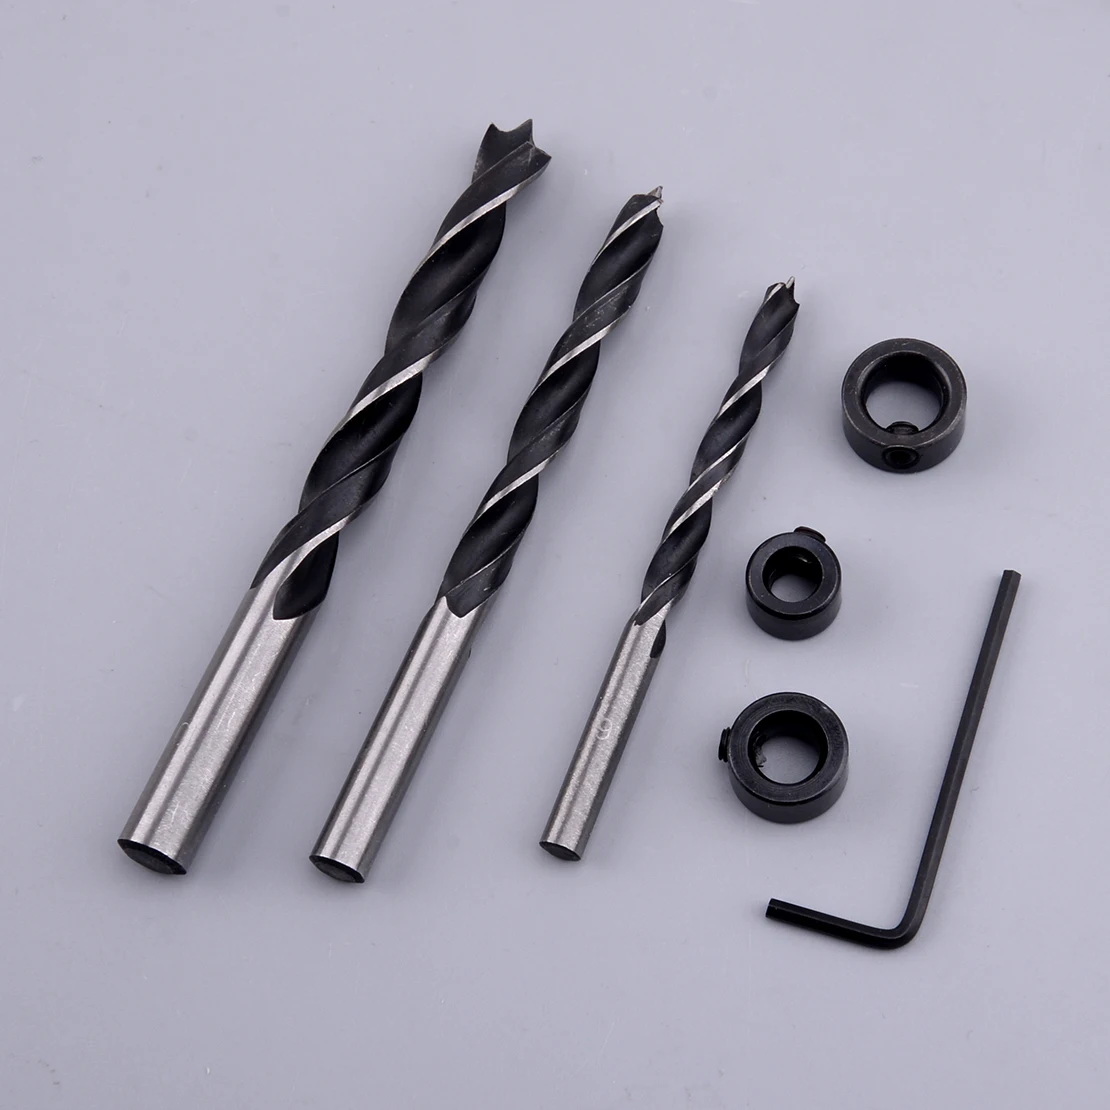 

6mm 8mm 10mm Woodworking Drill Bits Tools Steel For Precise Drilling Electronic Assembling Wire Switch Installation